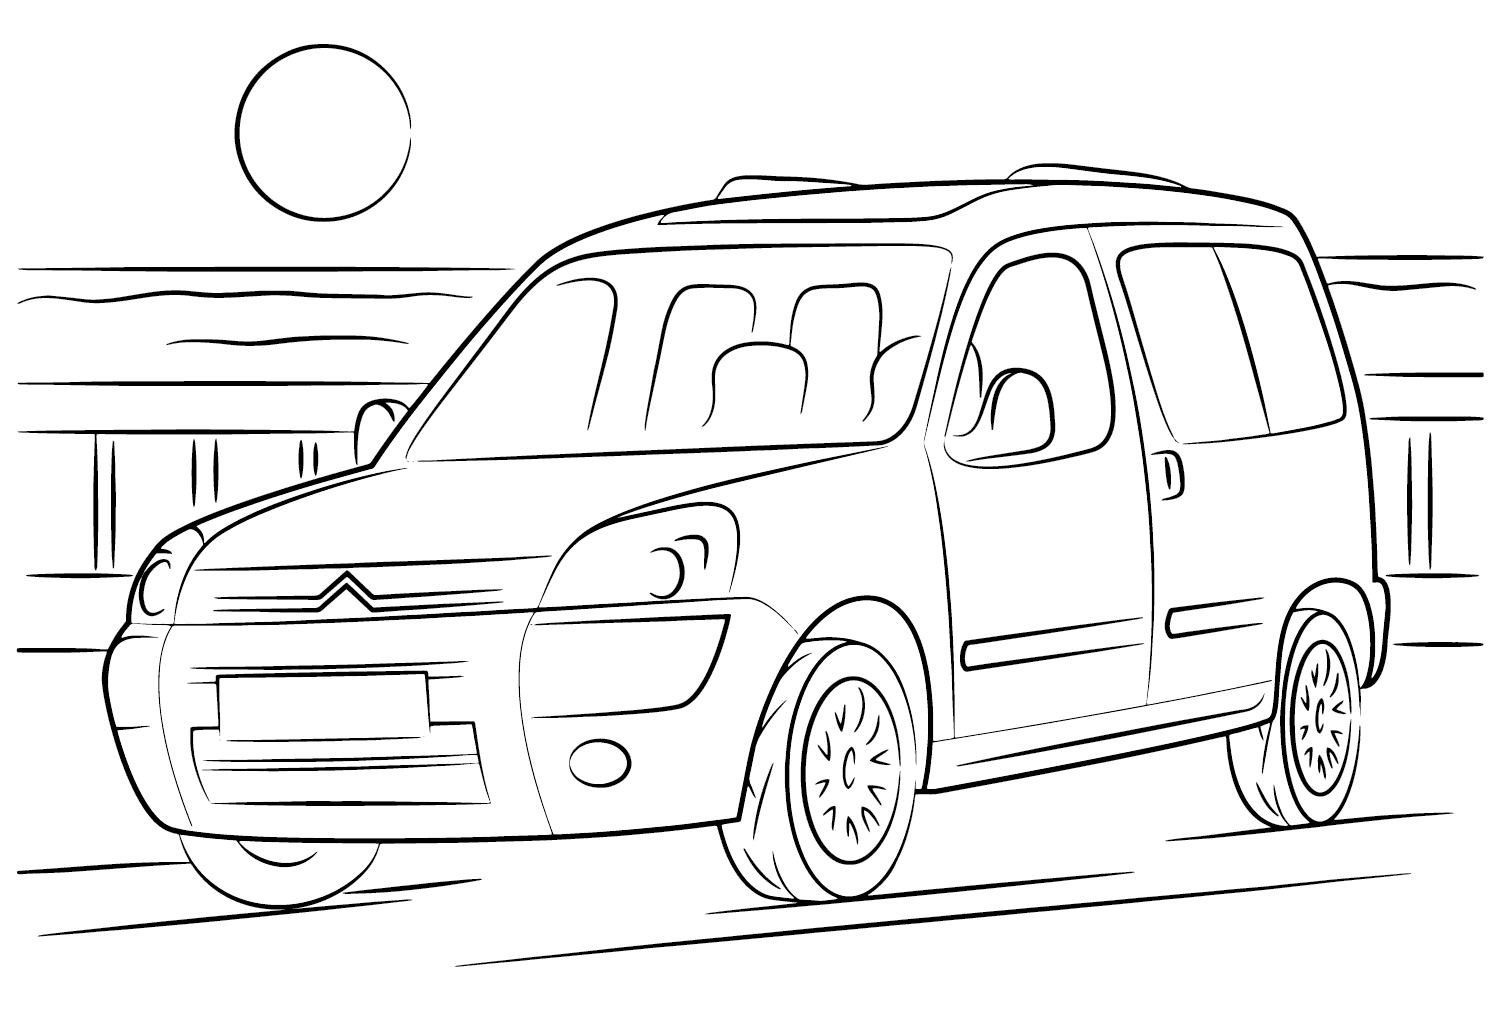 Citroën Berlingo Coloring Page from Citroën